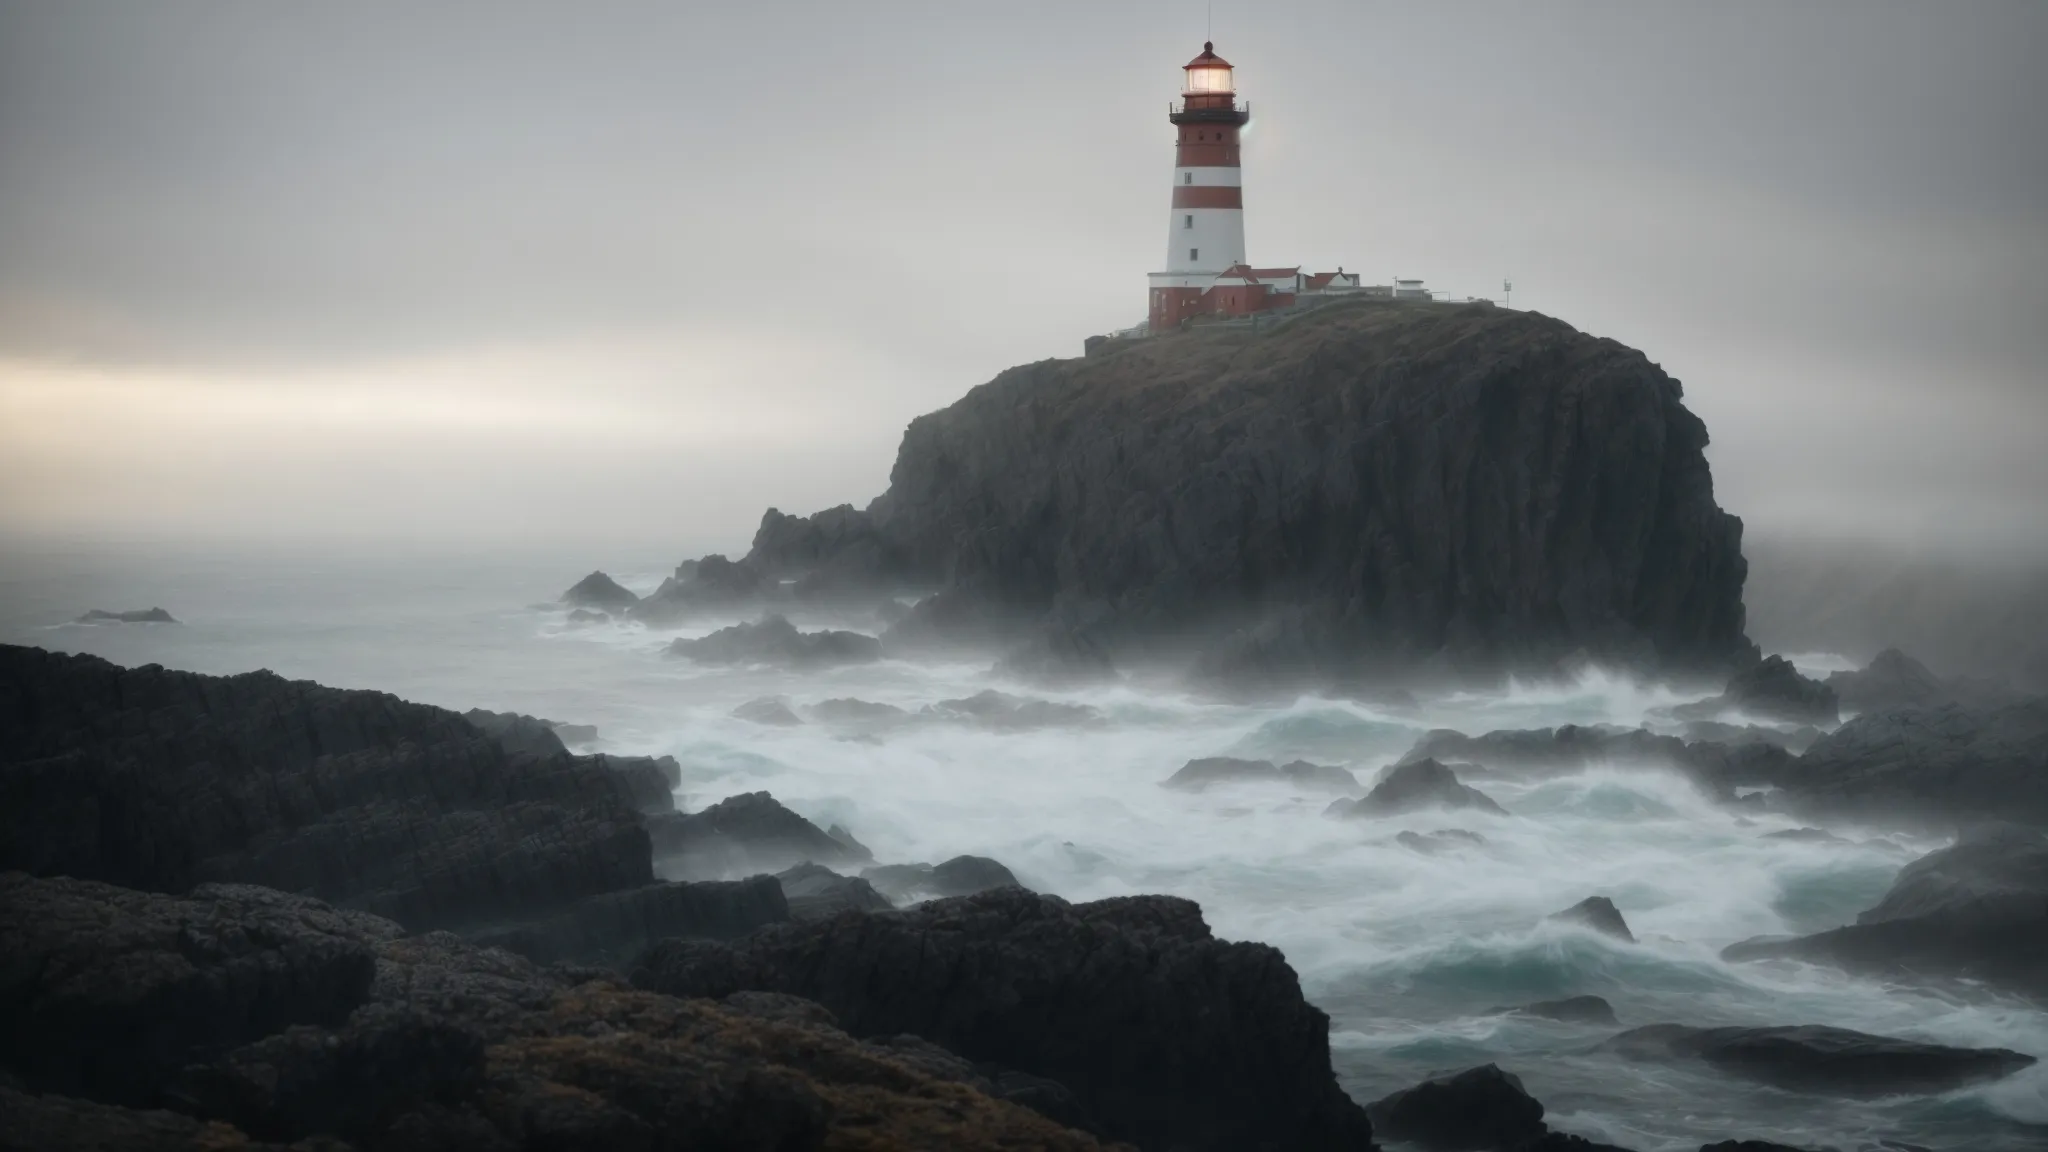 a lone lighthouse stands on a rocky coastline, its light piercing through the fog, guiding unseen ships in the vast ocean.